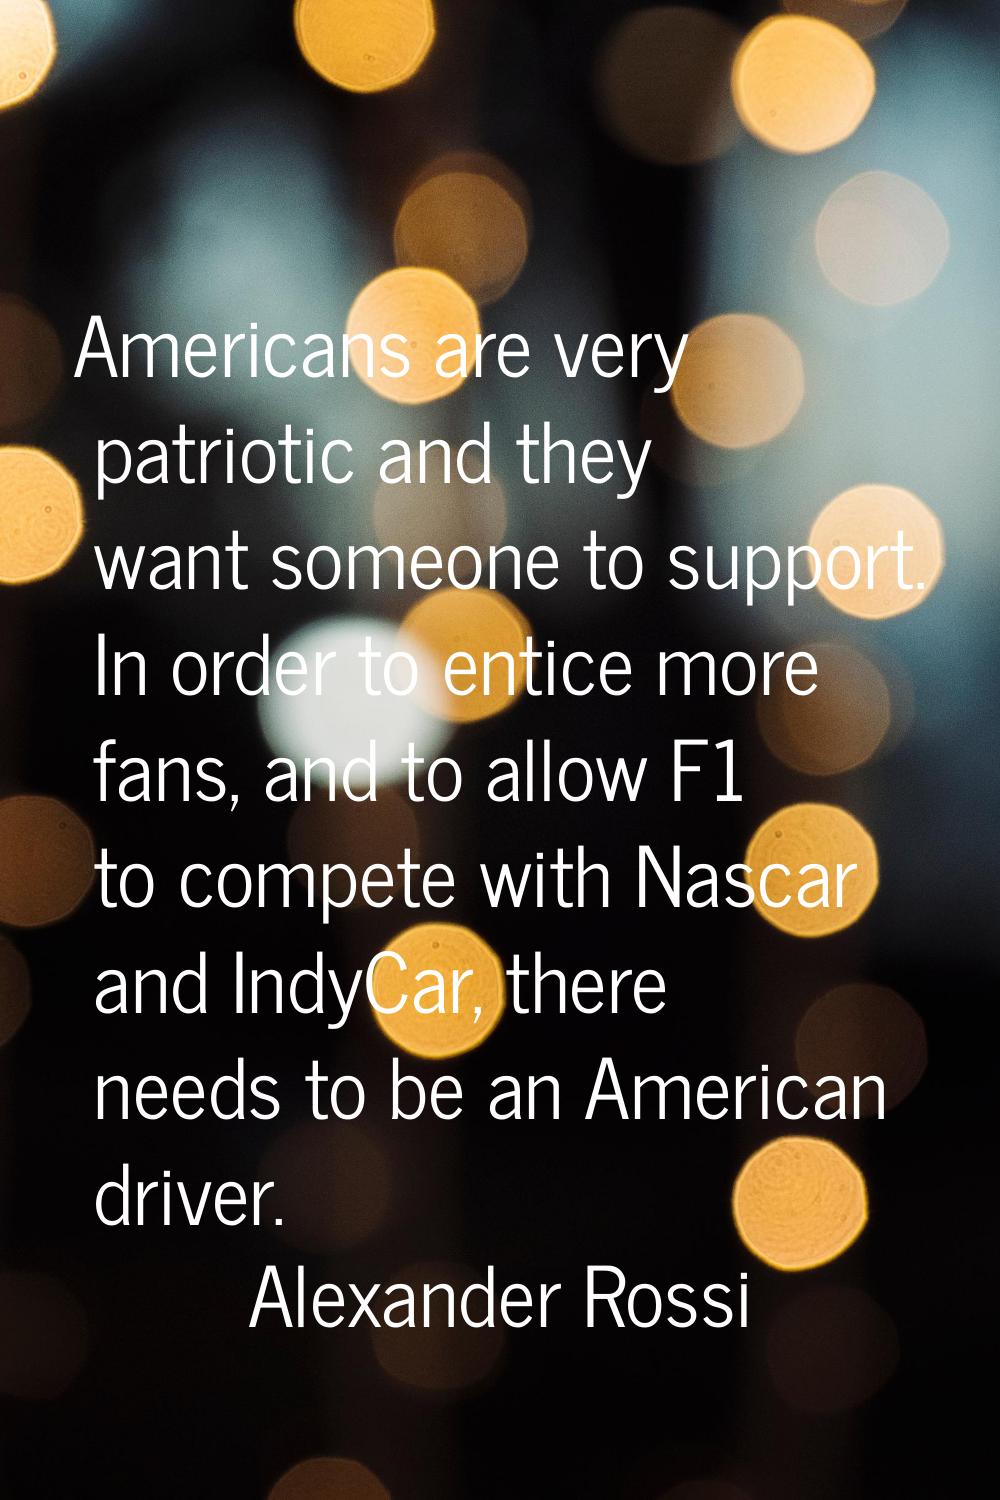 Americans are very patriotic and they want someone to support. In order to entice more fans, and to